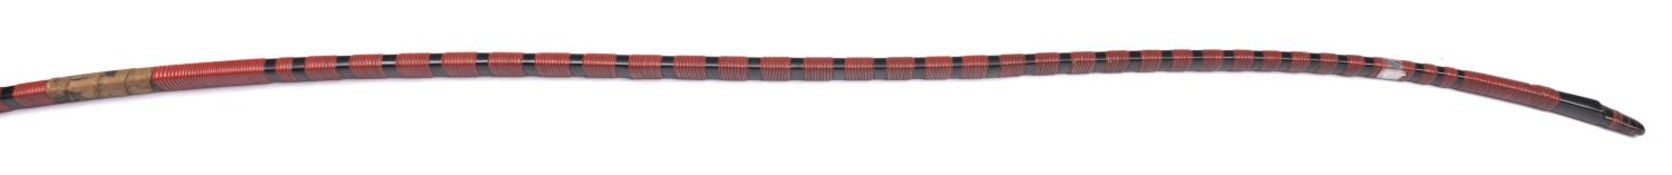 A Japanese bow, Yumi, 86" overall (7'2"), covered with black lacquer with bands of red lacquer